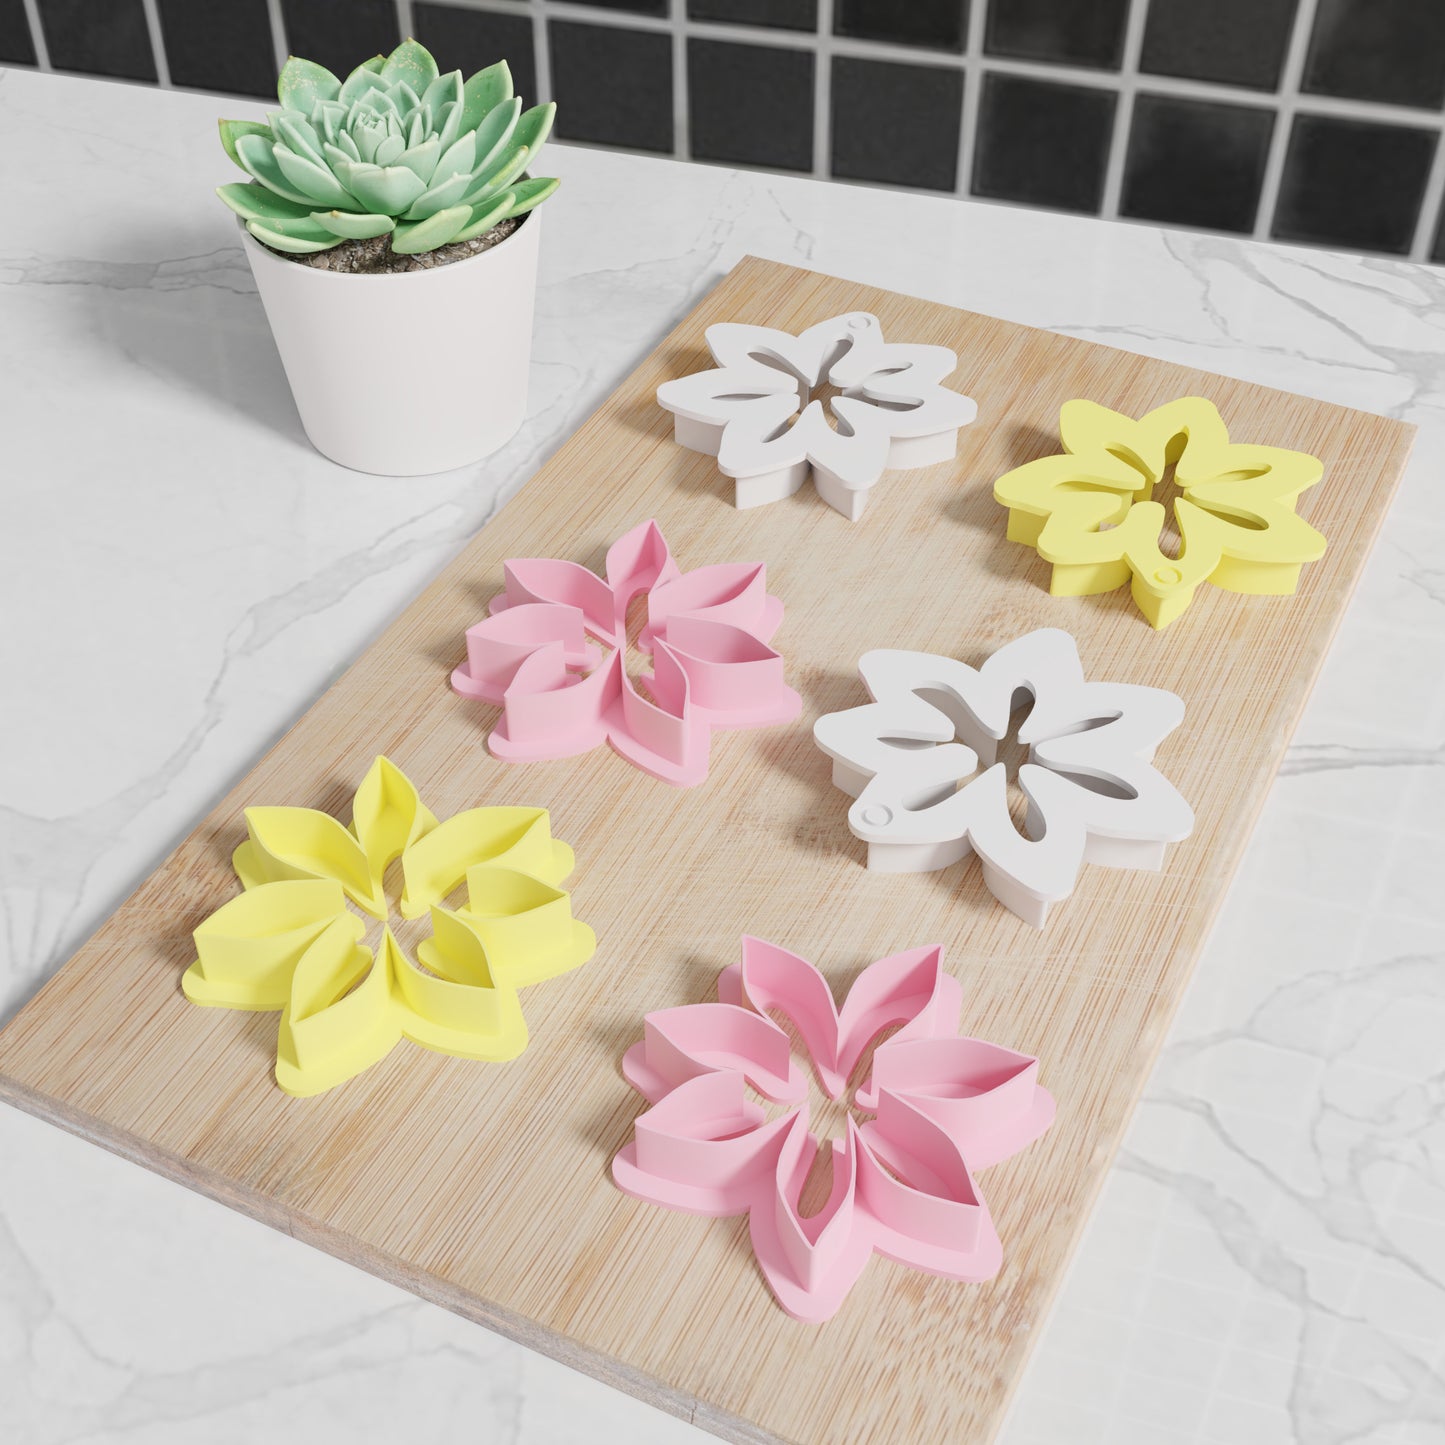 Easter Lily Cookie Cutter Set. Matches Others In Our Easter Collection. Modern Stylish Easter Lilly Cookie Cutter